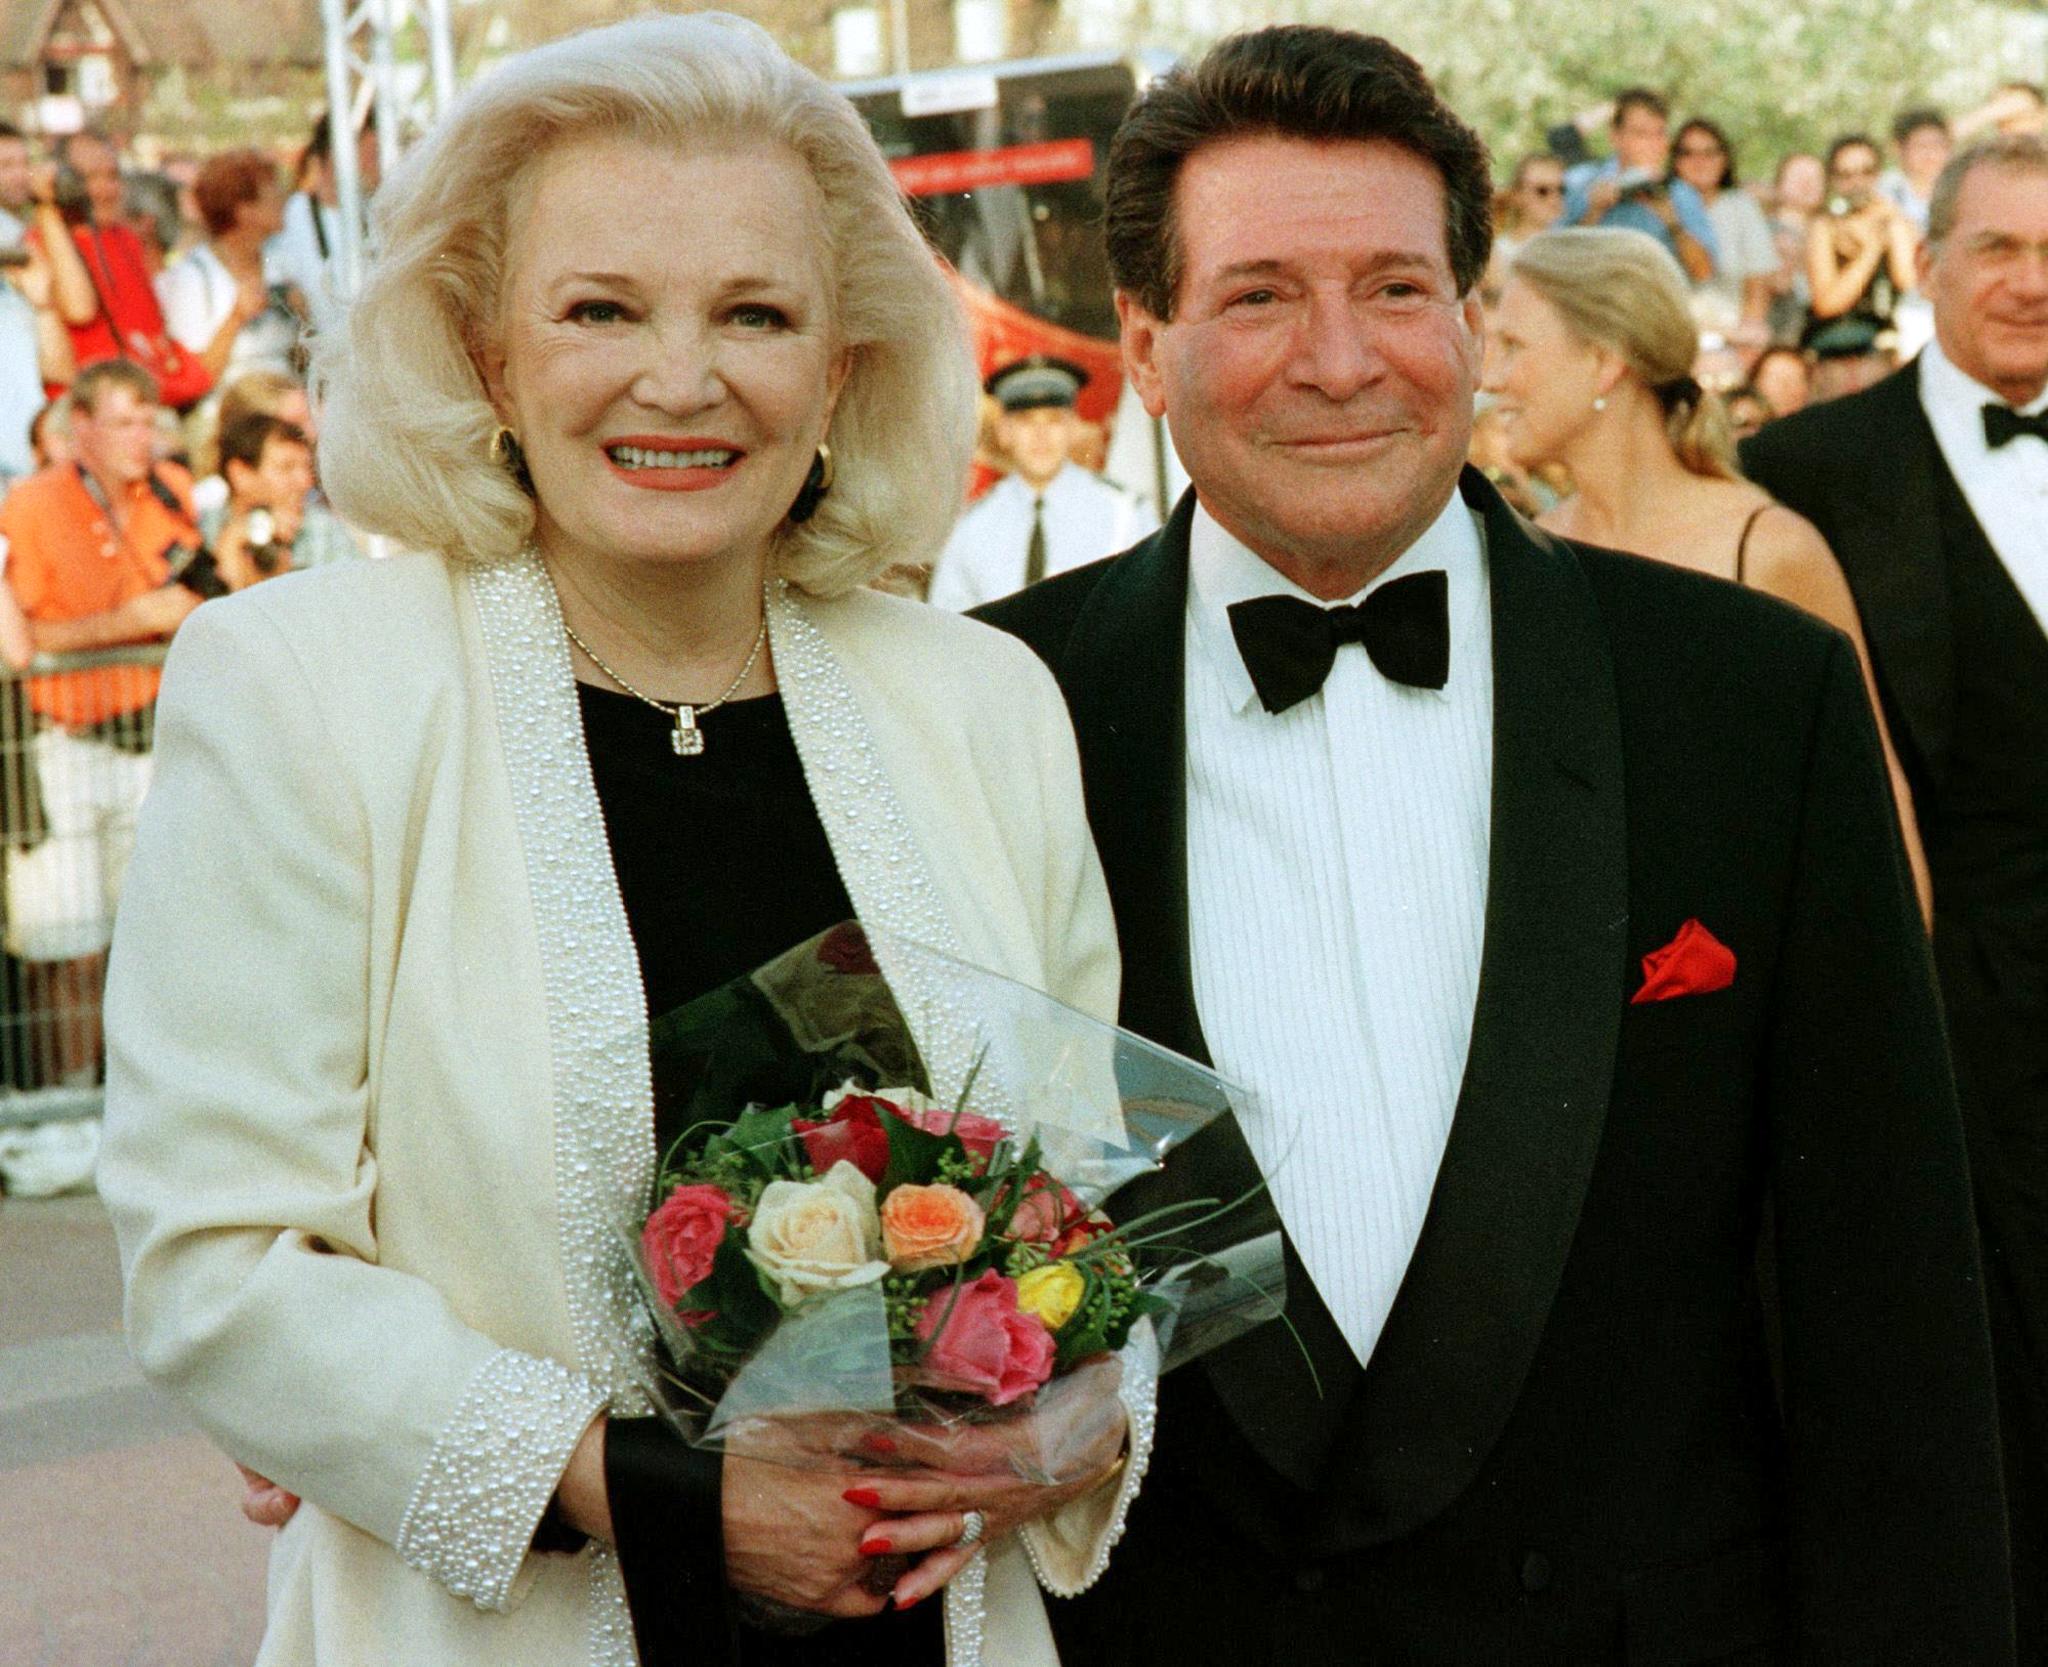 Gena Rowlands and Robert Forrest at the 25th American Film Festival in 1999 | Source: Getty Images